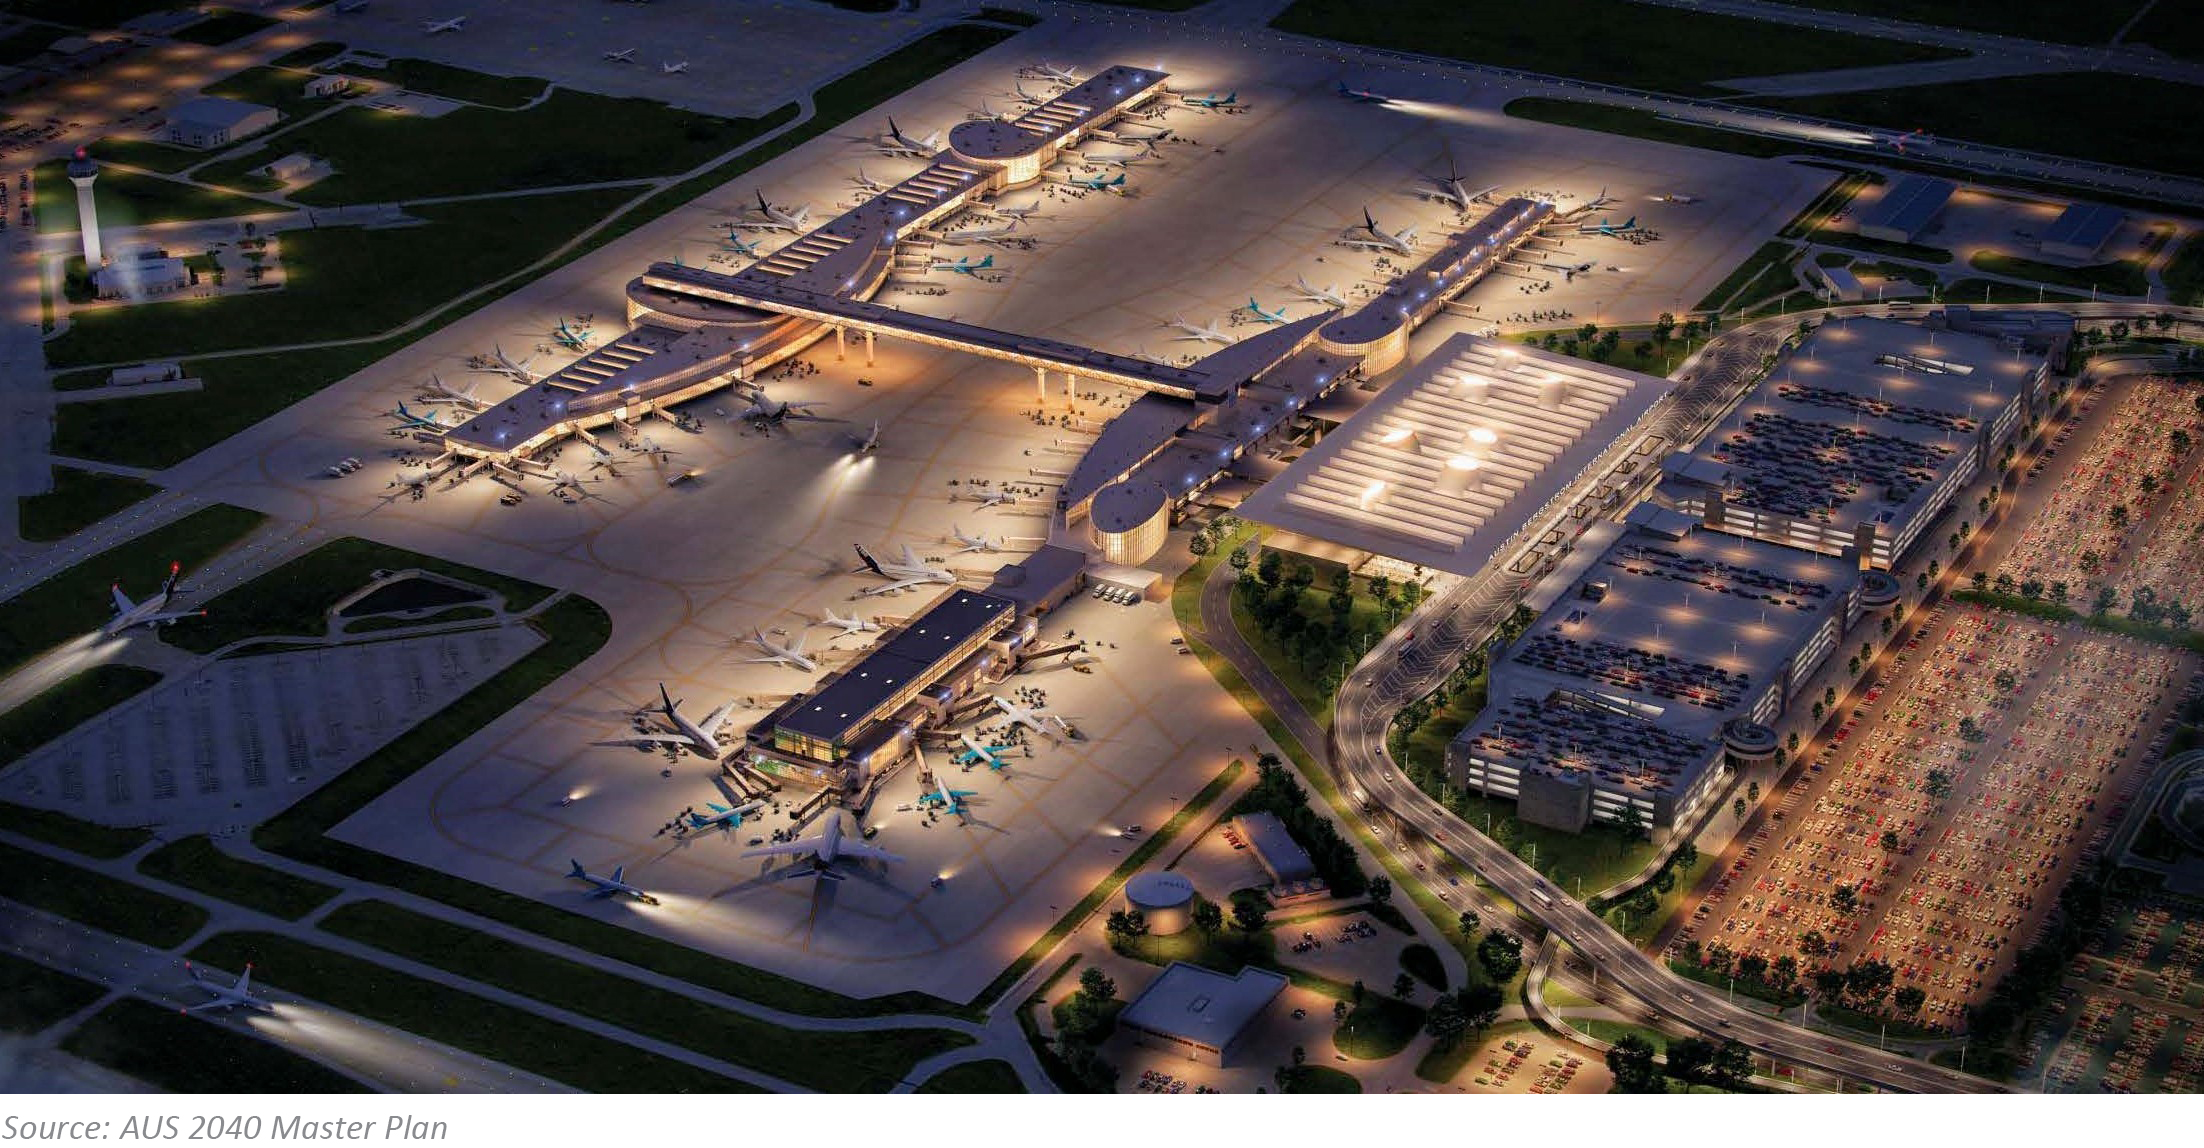 KFA to Support Major Expansion Program at the Austin Airport